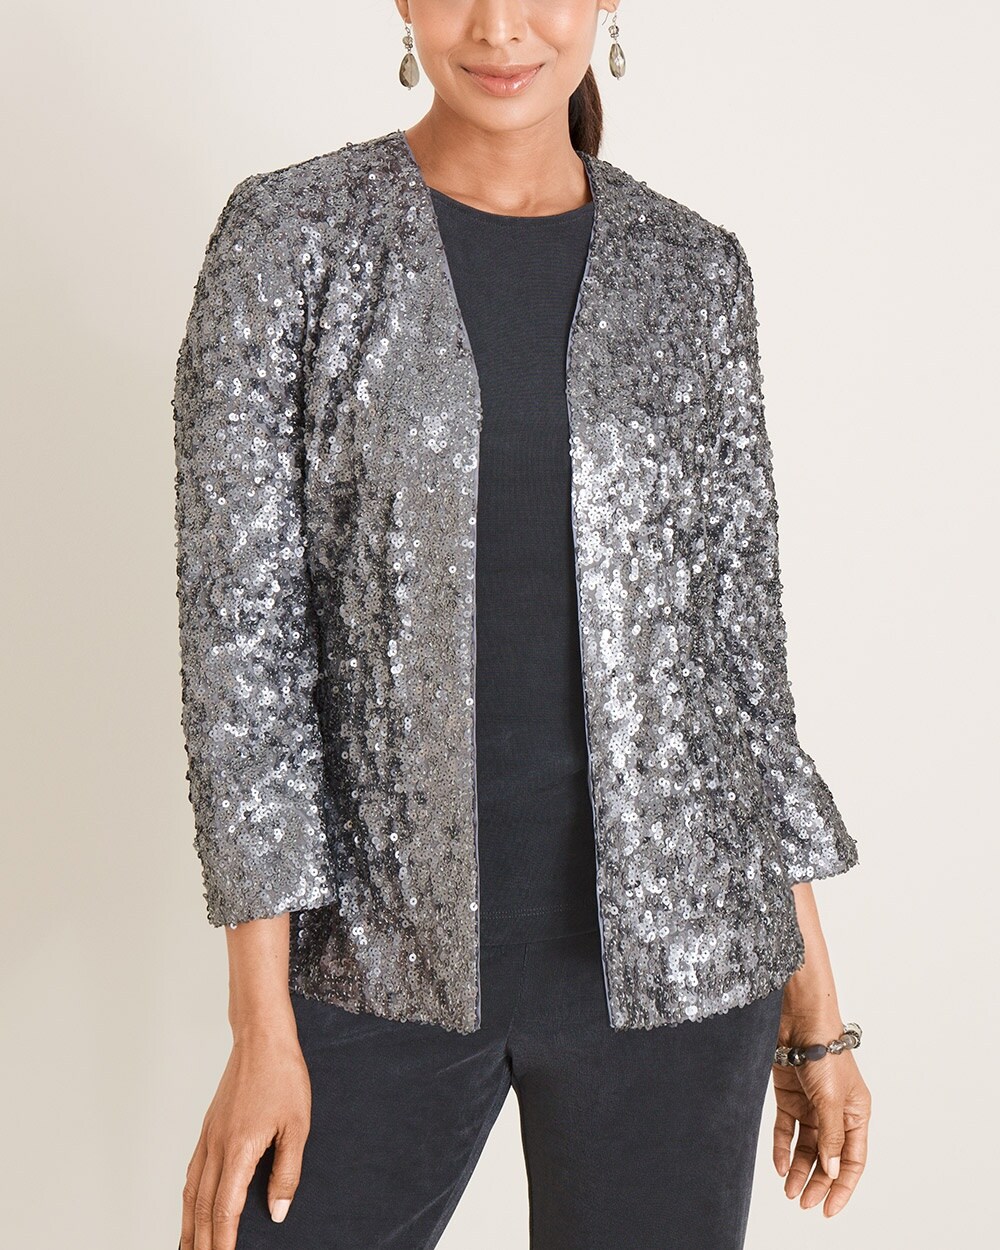 Travelers Collection Sequin Jacket